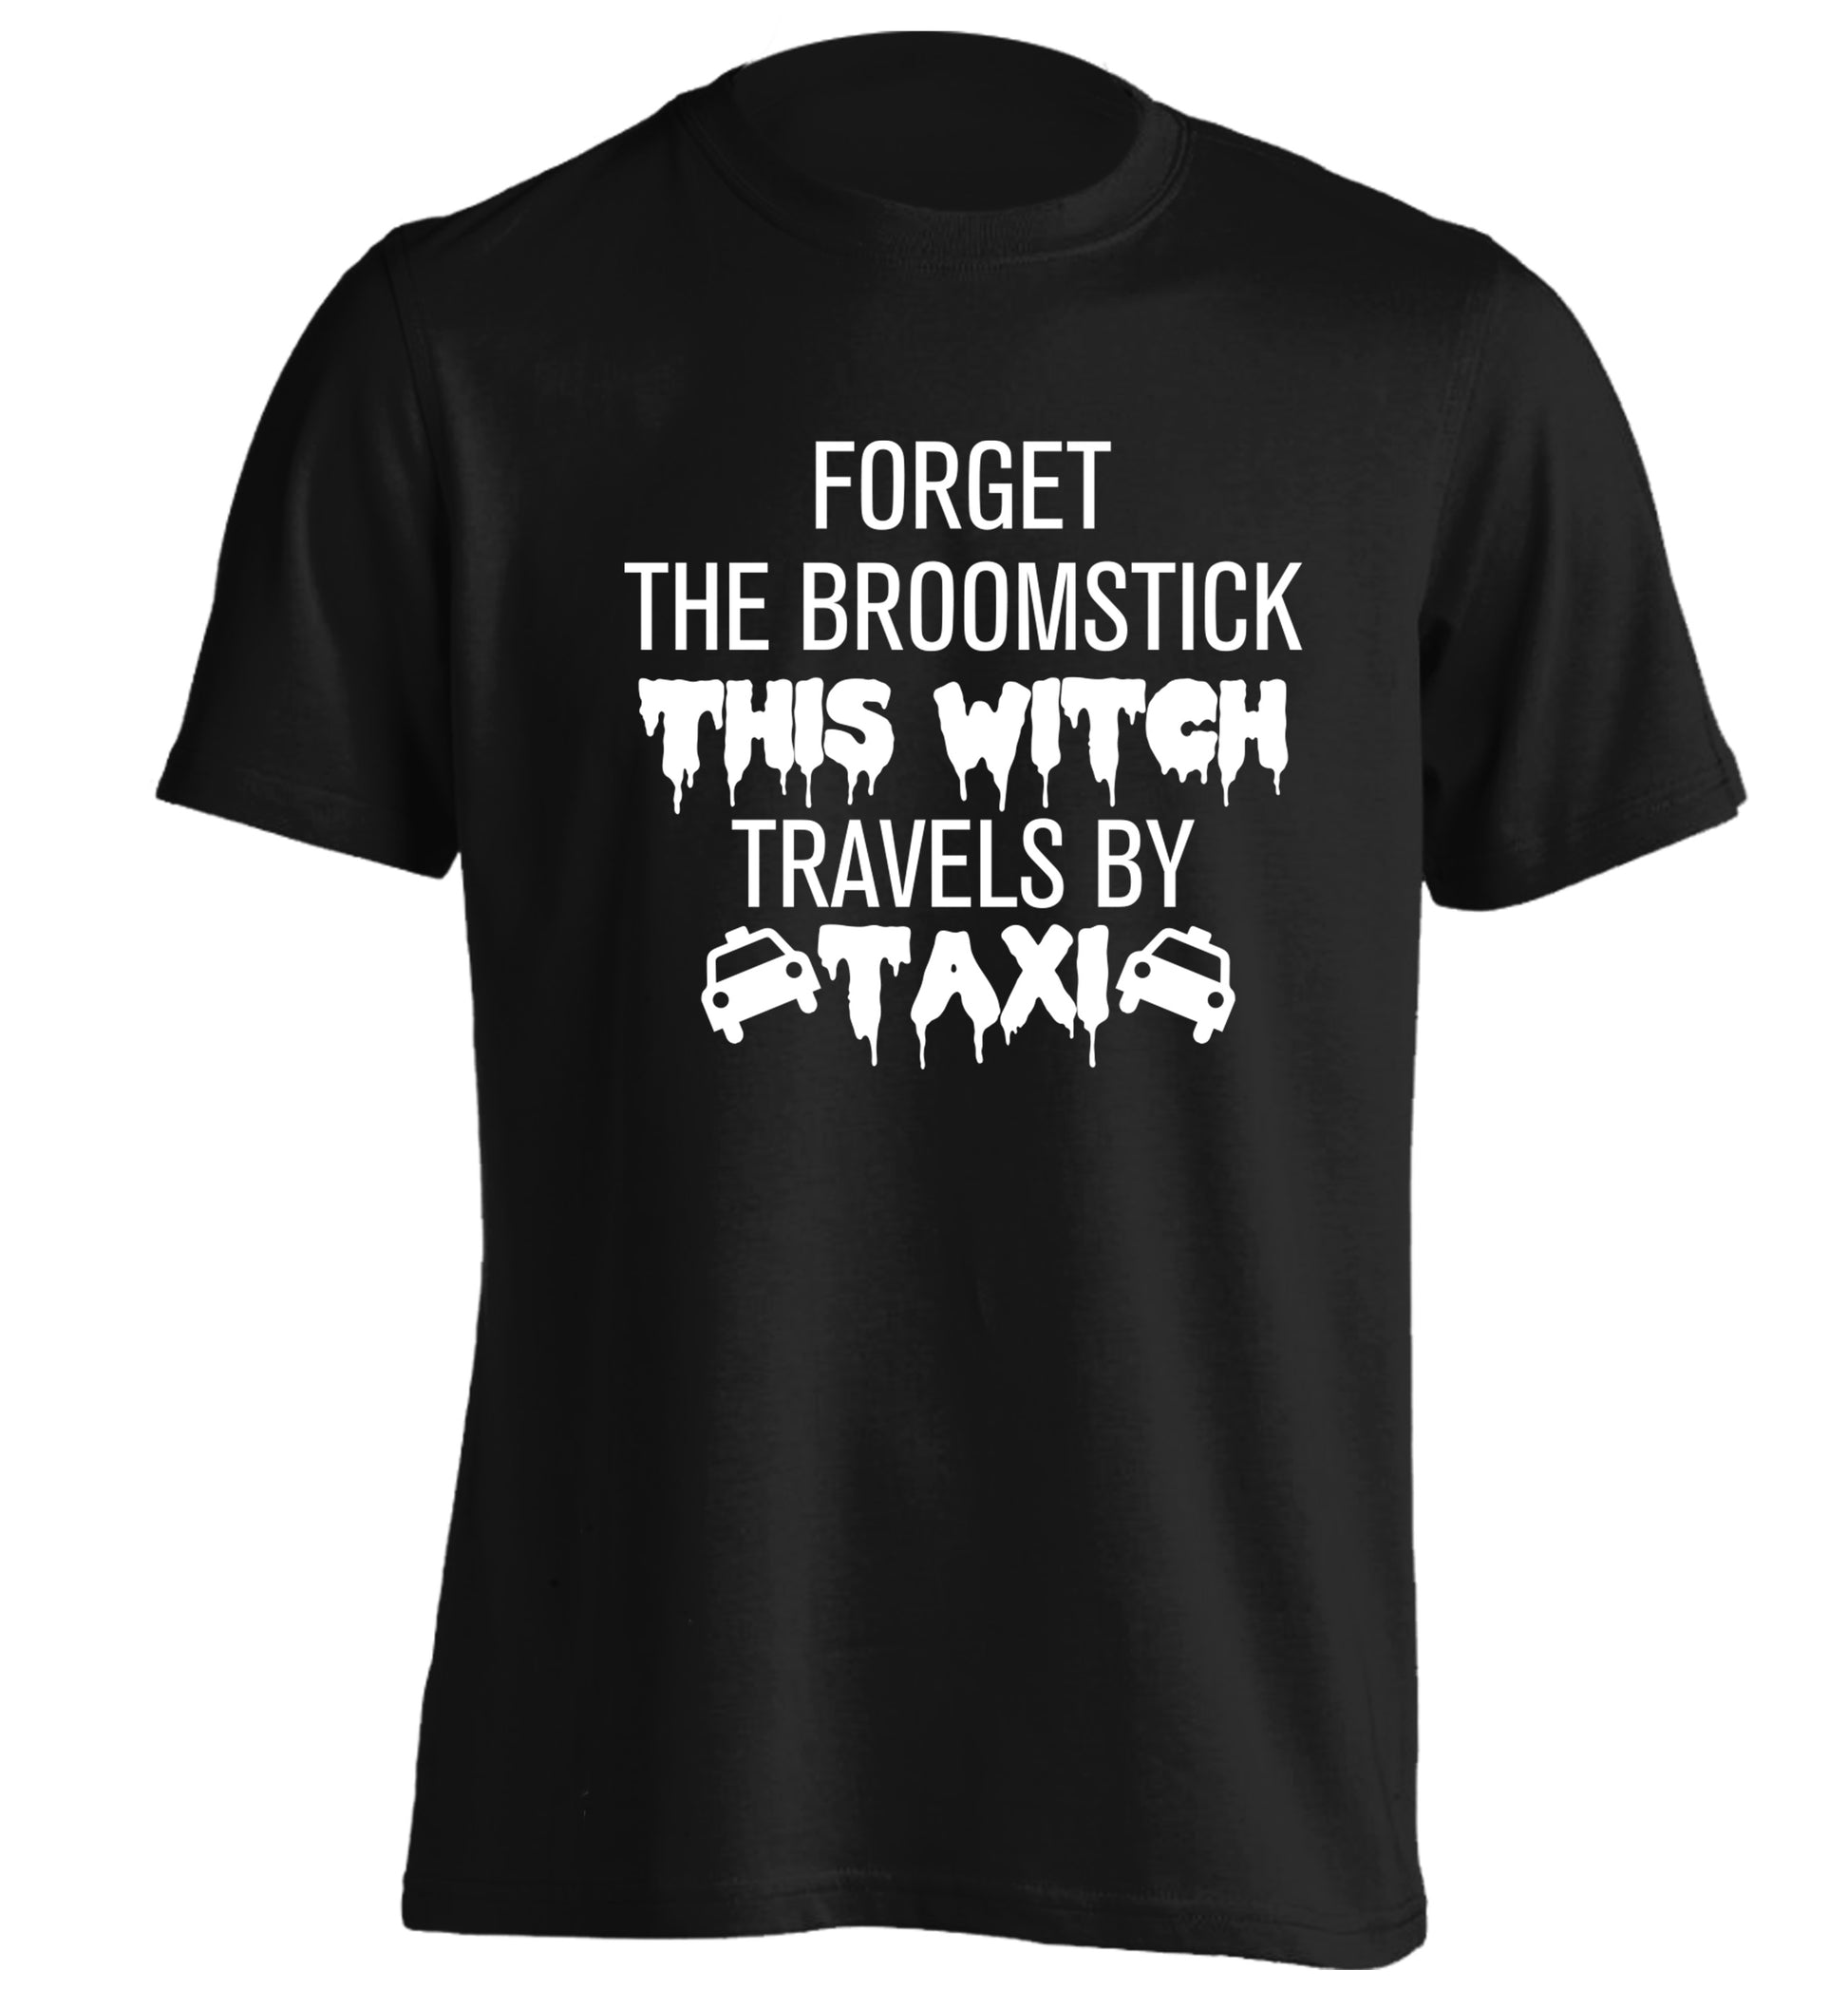 Forget the broomstick this witch travels by taxi adults unisexblack Tshirt 2XL